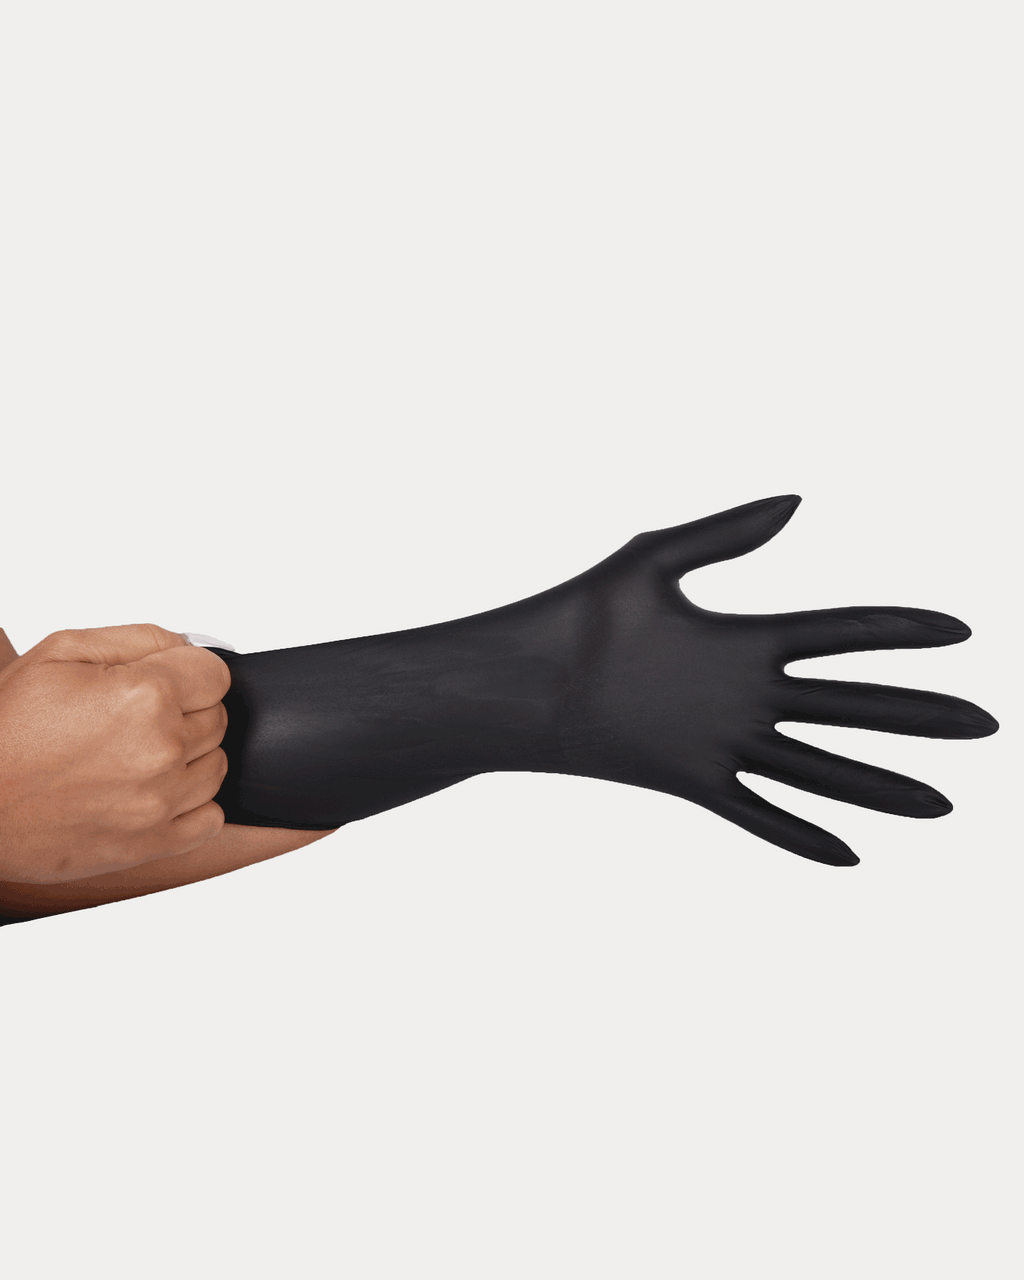 GIF, Nitrile glove, hair coloring glove, rubber glove, nitrile glove brands, hair salon gloves, gloves for salon use, nitrile gloves disposable, nitrile gloves non medical, nitrile glove powder free